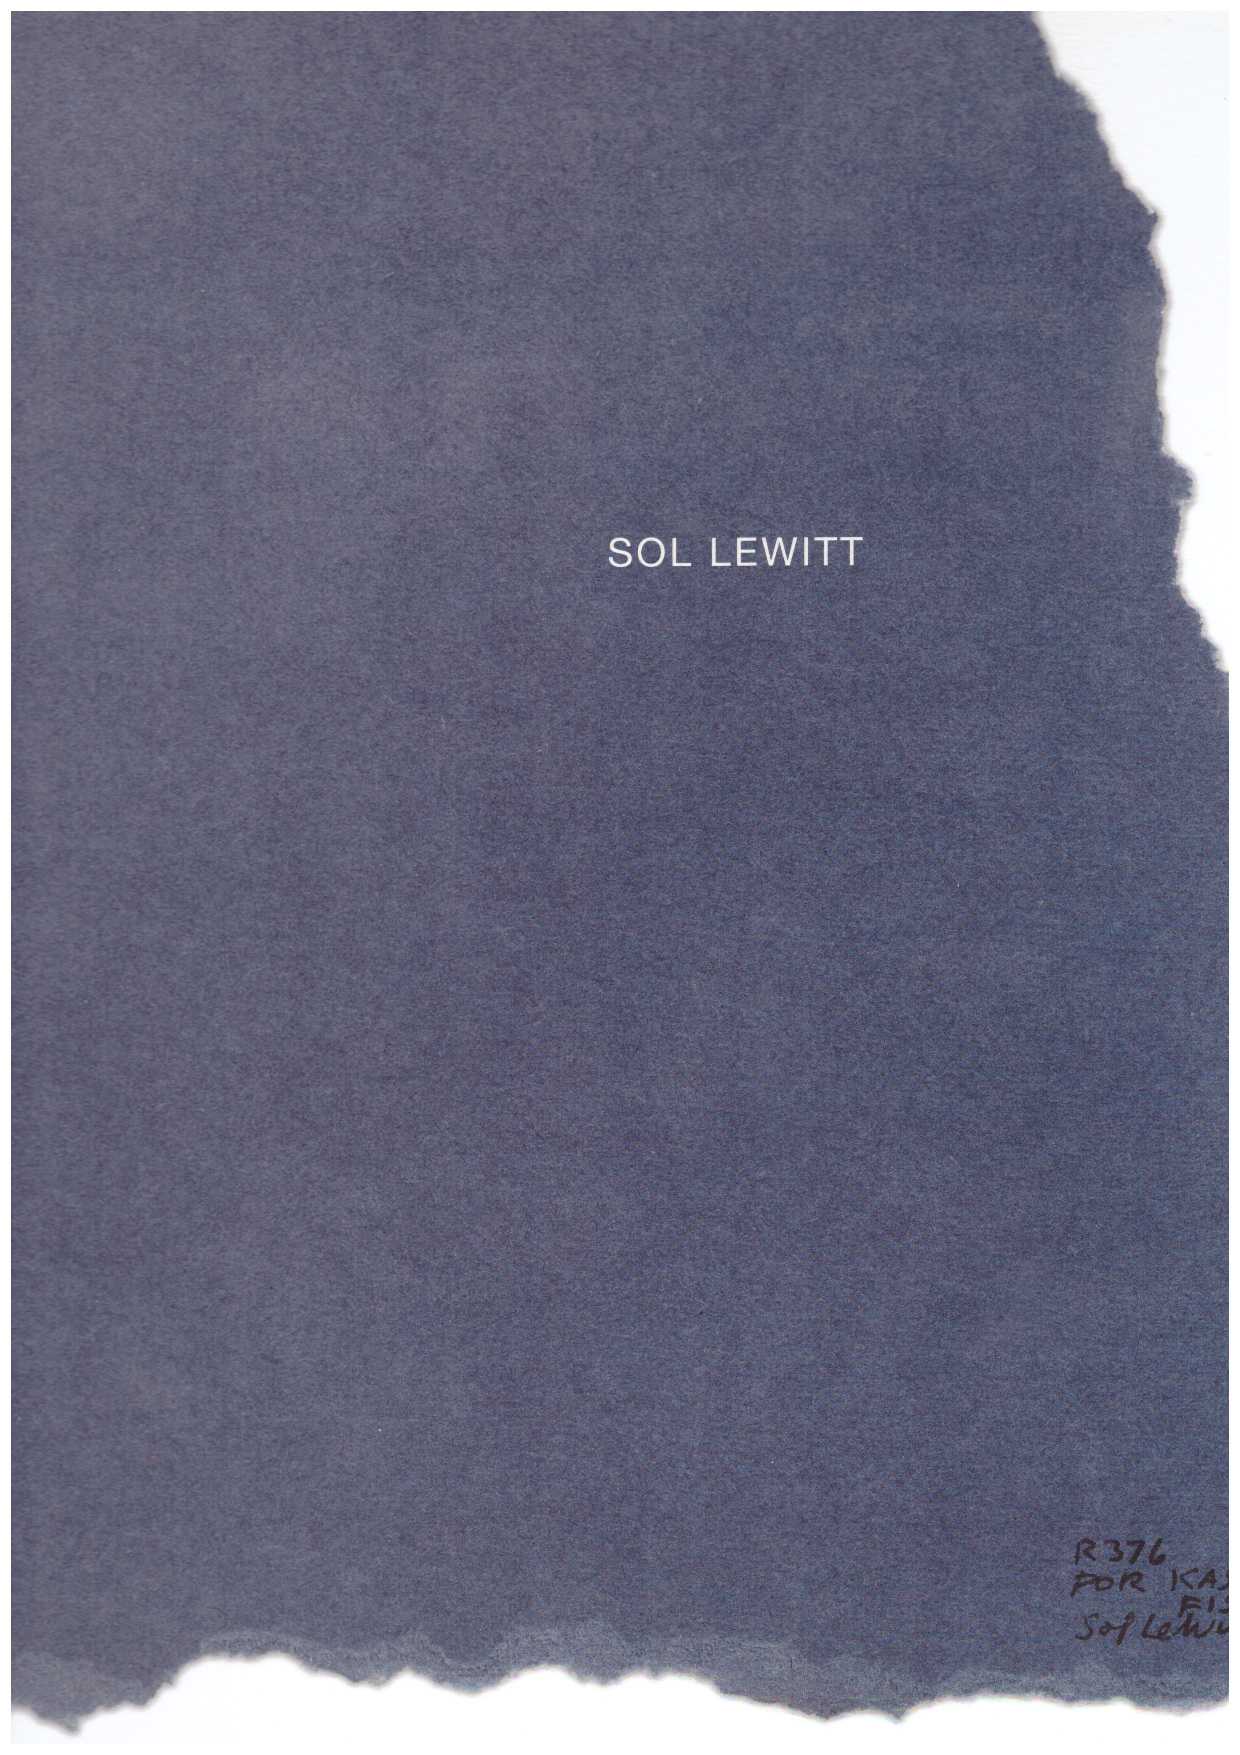 LEWITT, Sol - Not to be sold for more than 100$